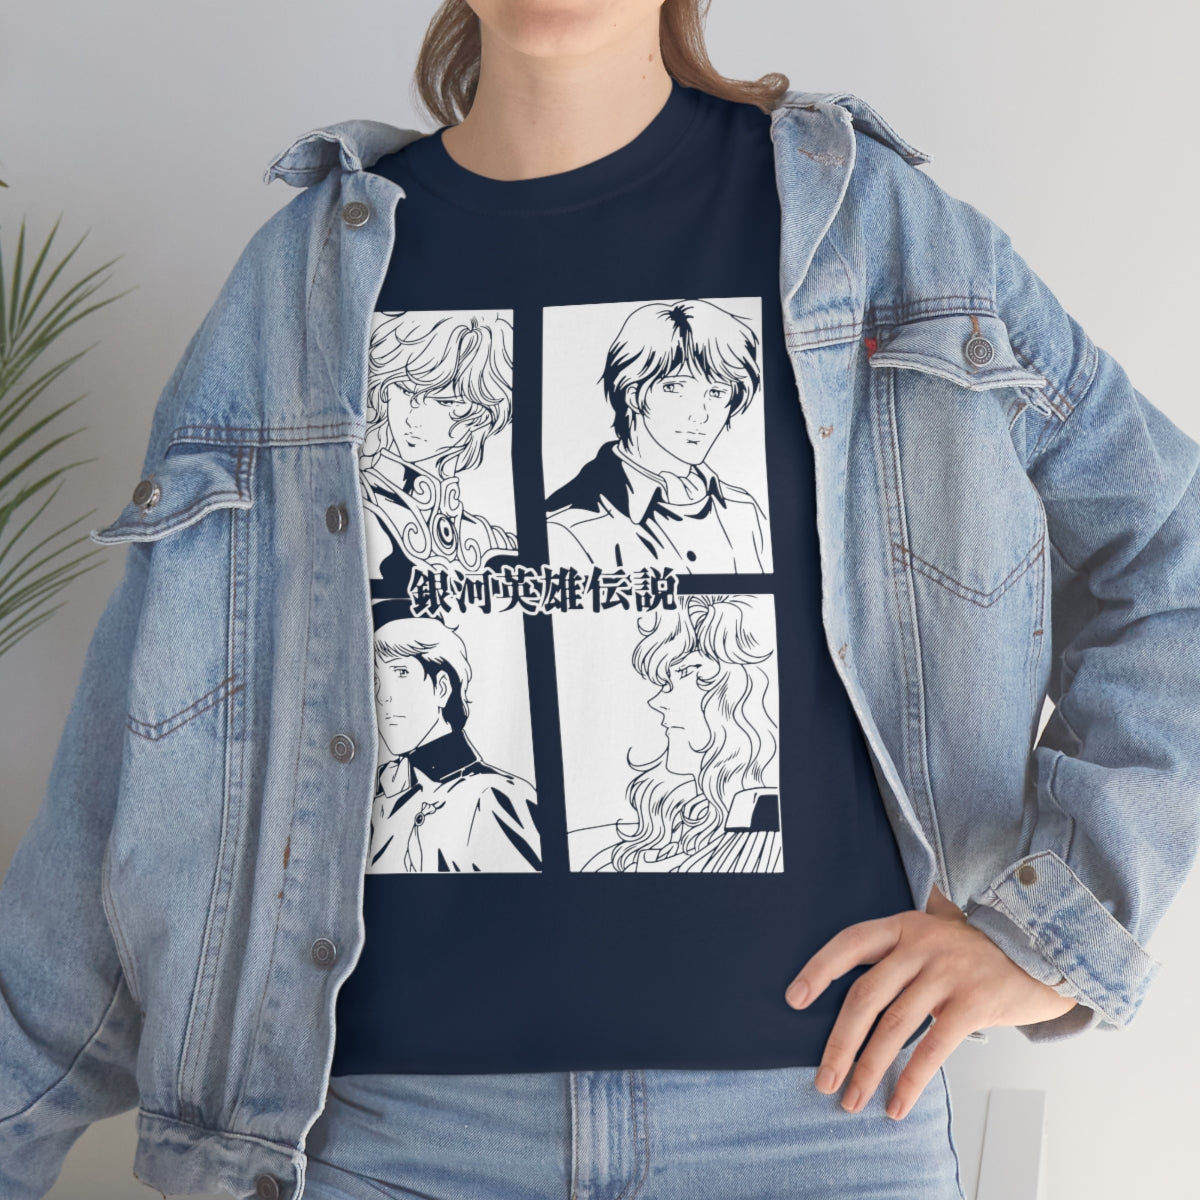 Legend of the Galactic Heroes T-Shirt